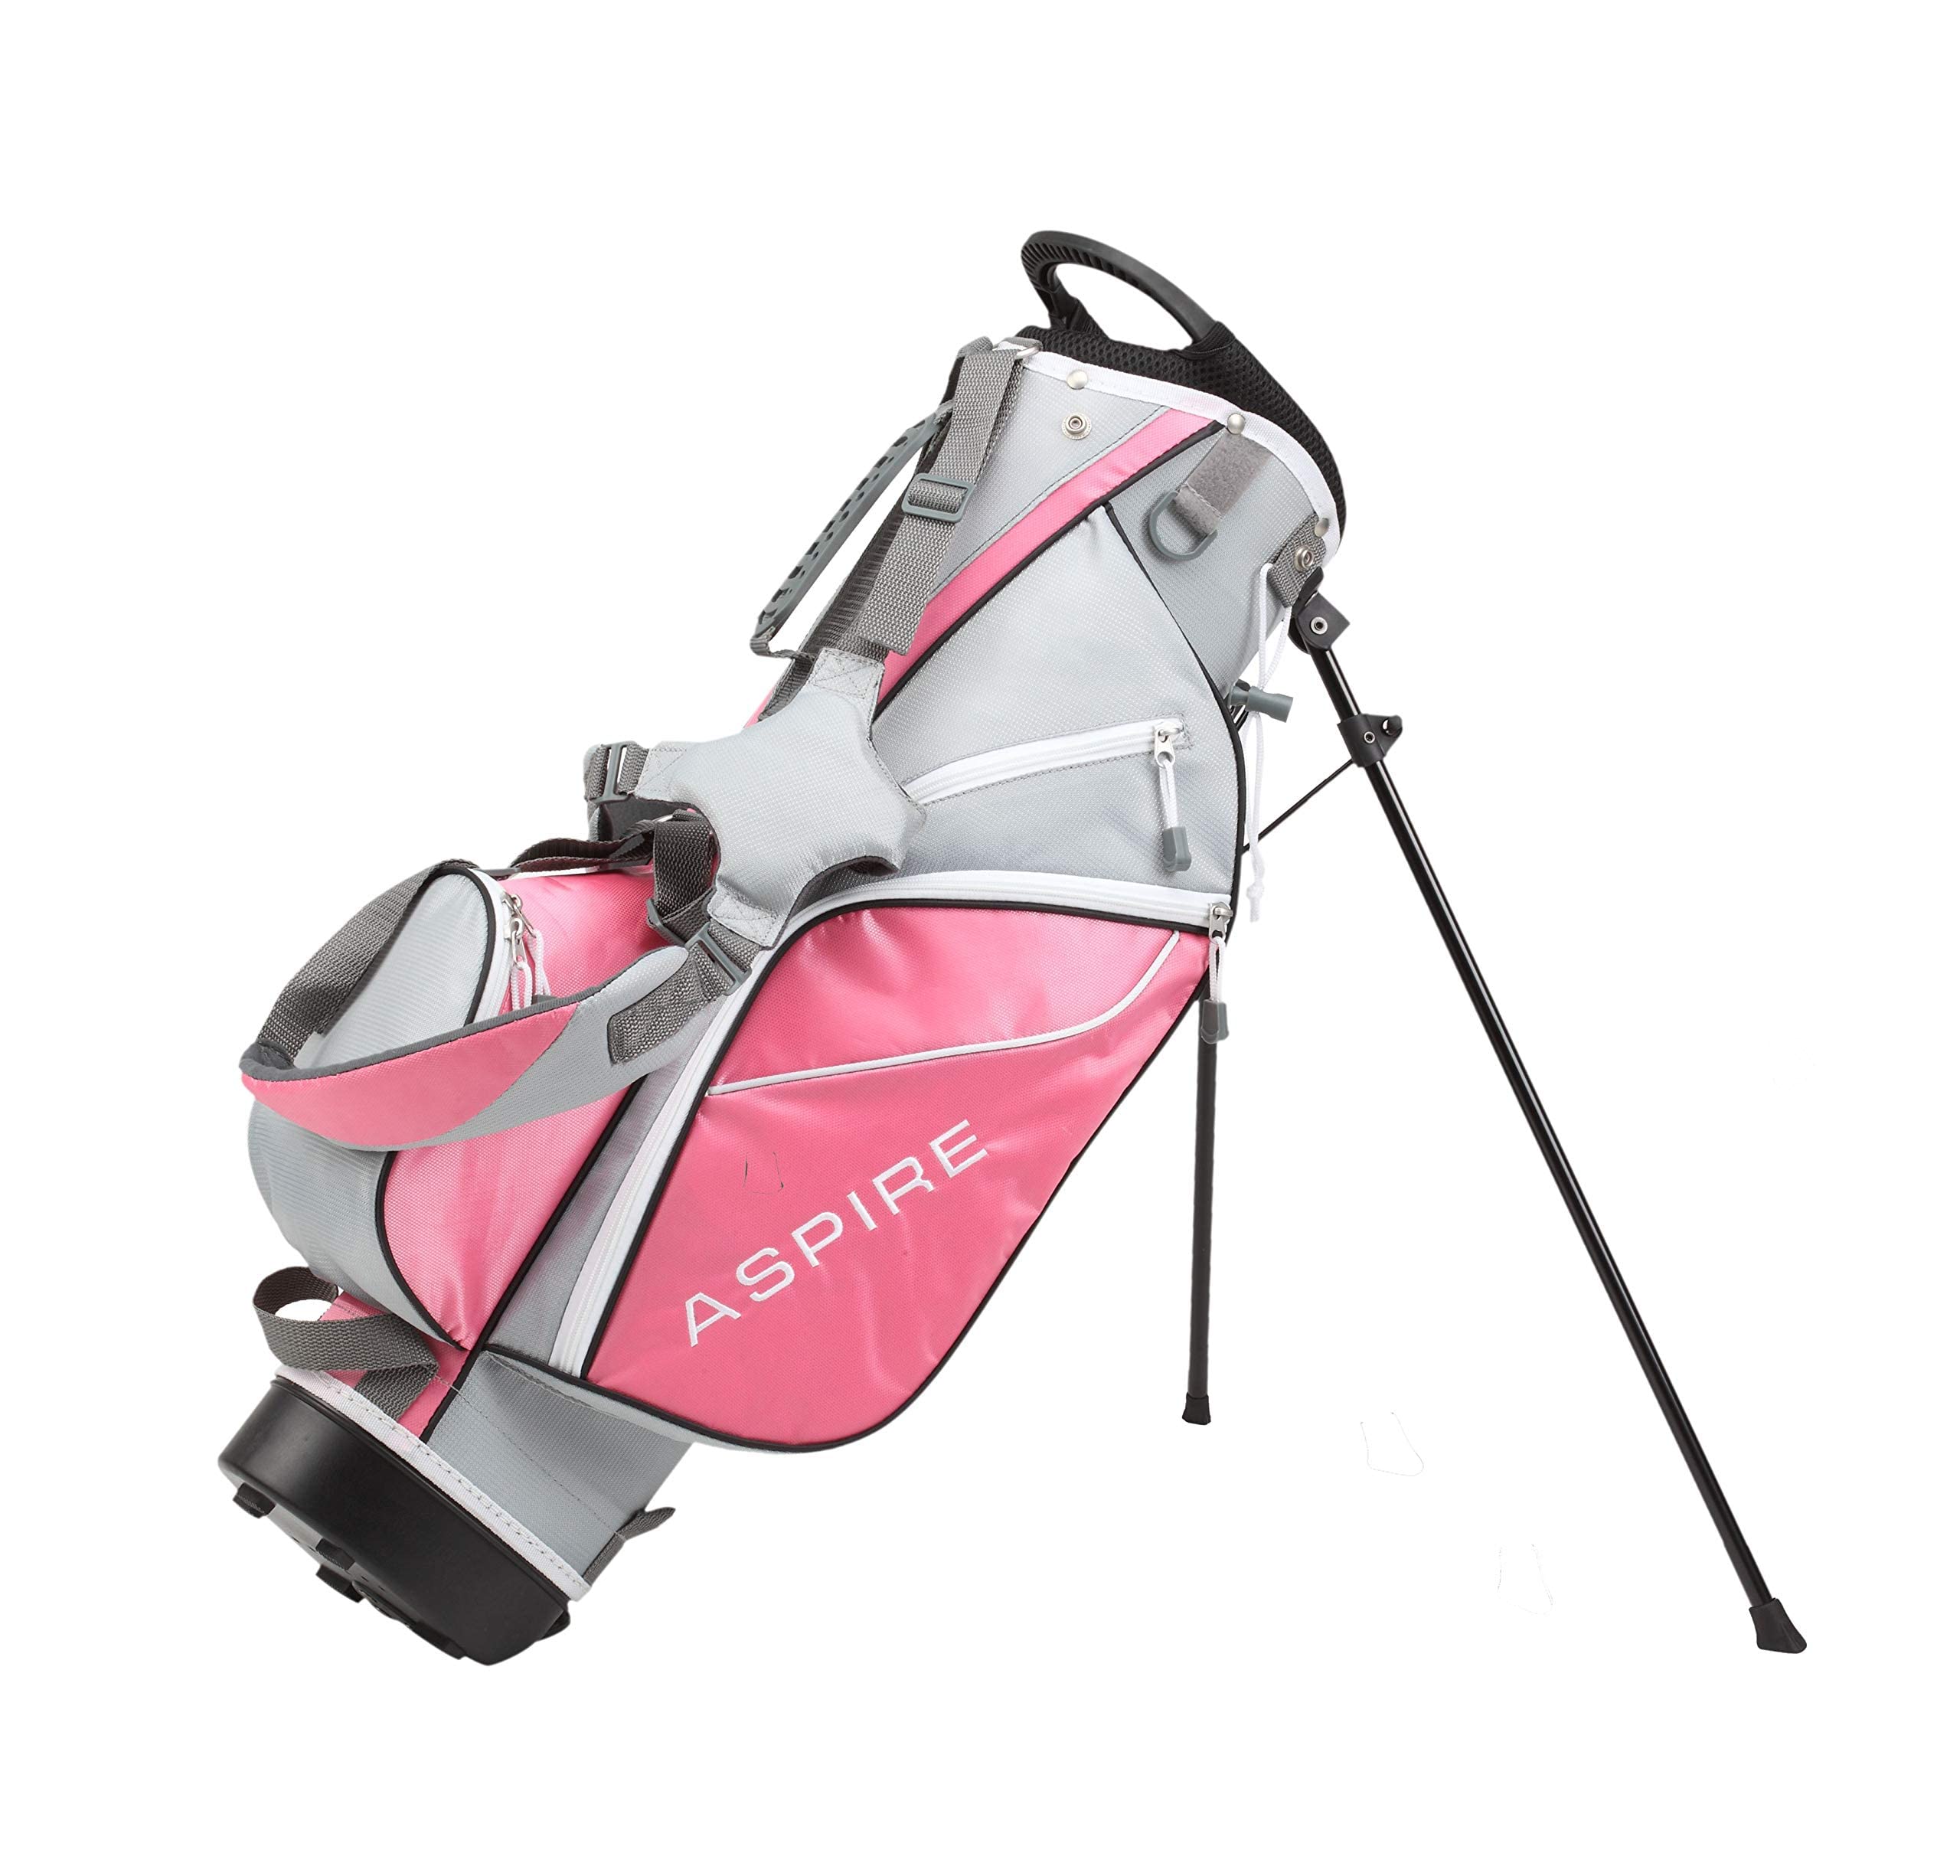 Aspire Junior Plus Complete Golf Club Set for Children, Kids - 5 Age Groups Boys and Girls - Right Hand, Real Girls Junior Golf Bag, Kids Golf Clubs Set